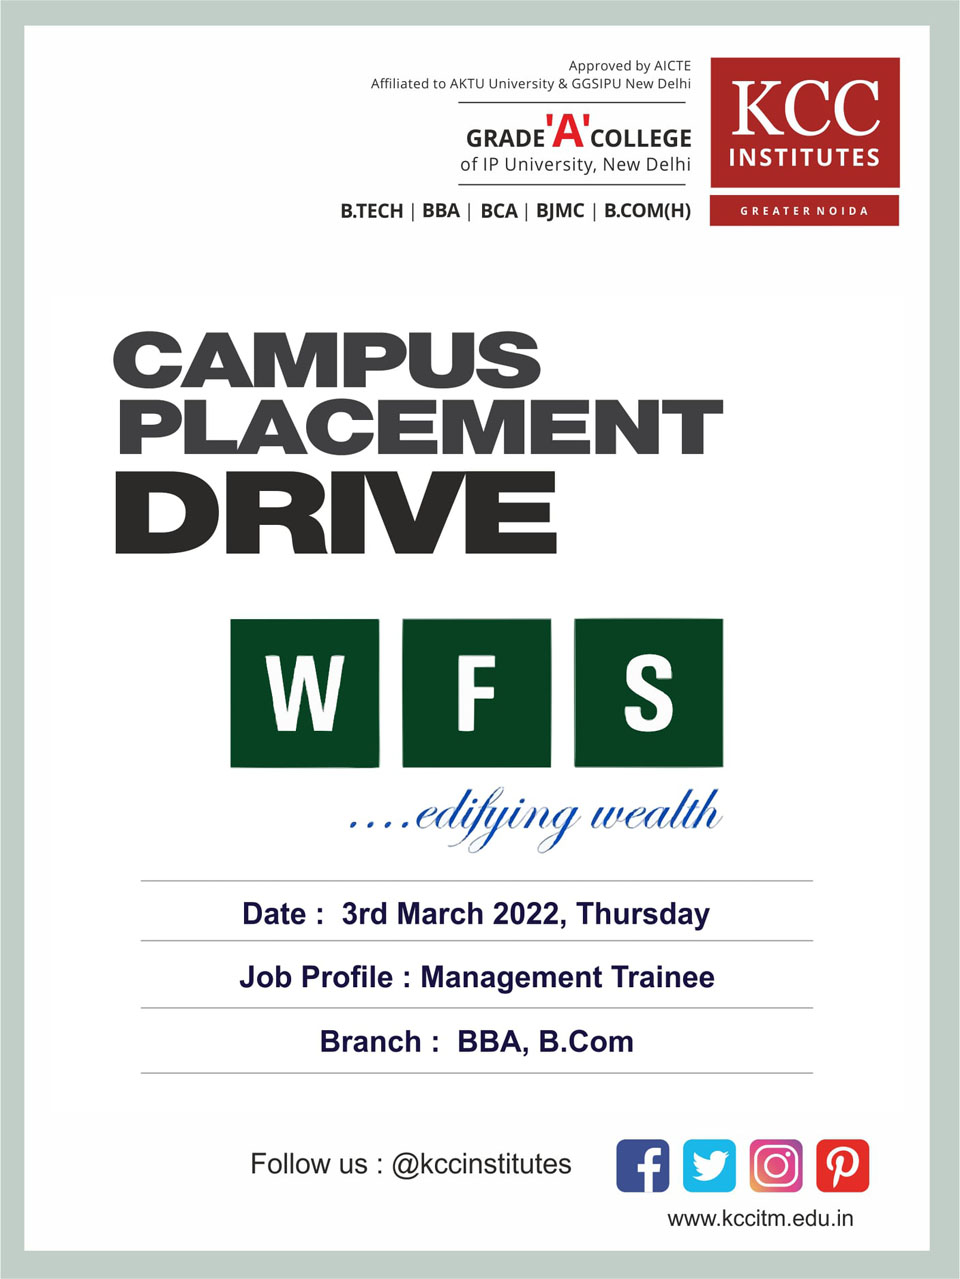 Campus Placement Drive for WFS (Wise Finserv) on 3rd March 2022 (Thursday)